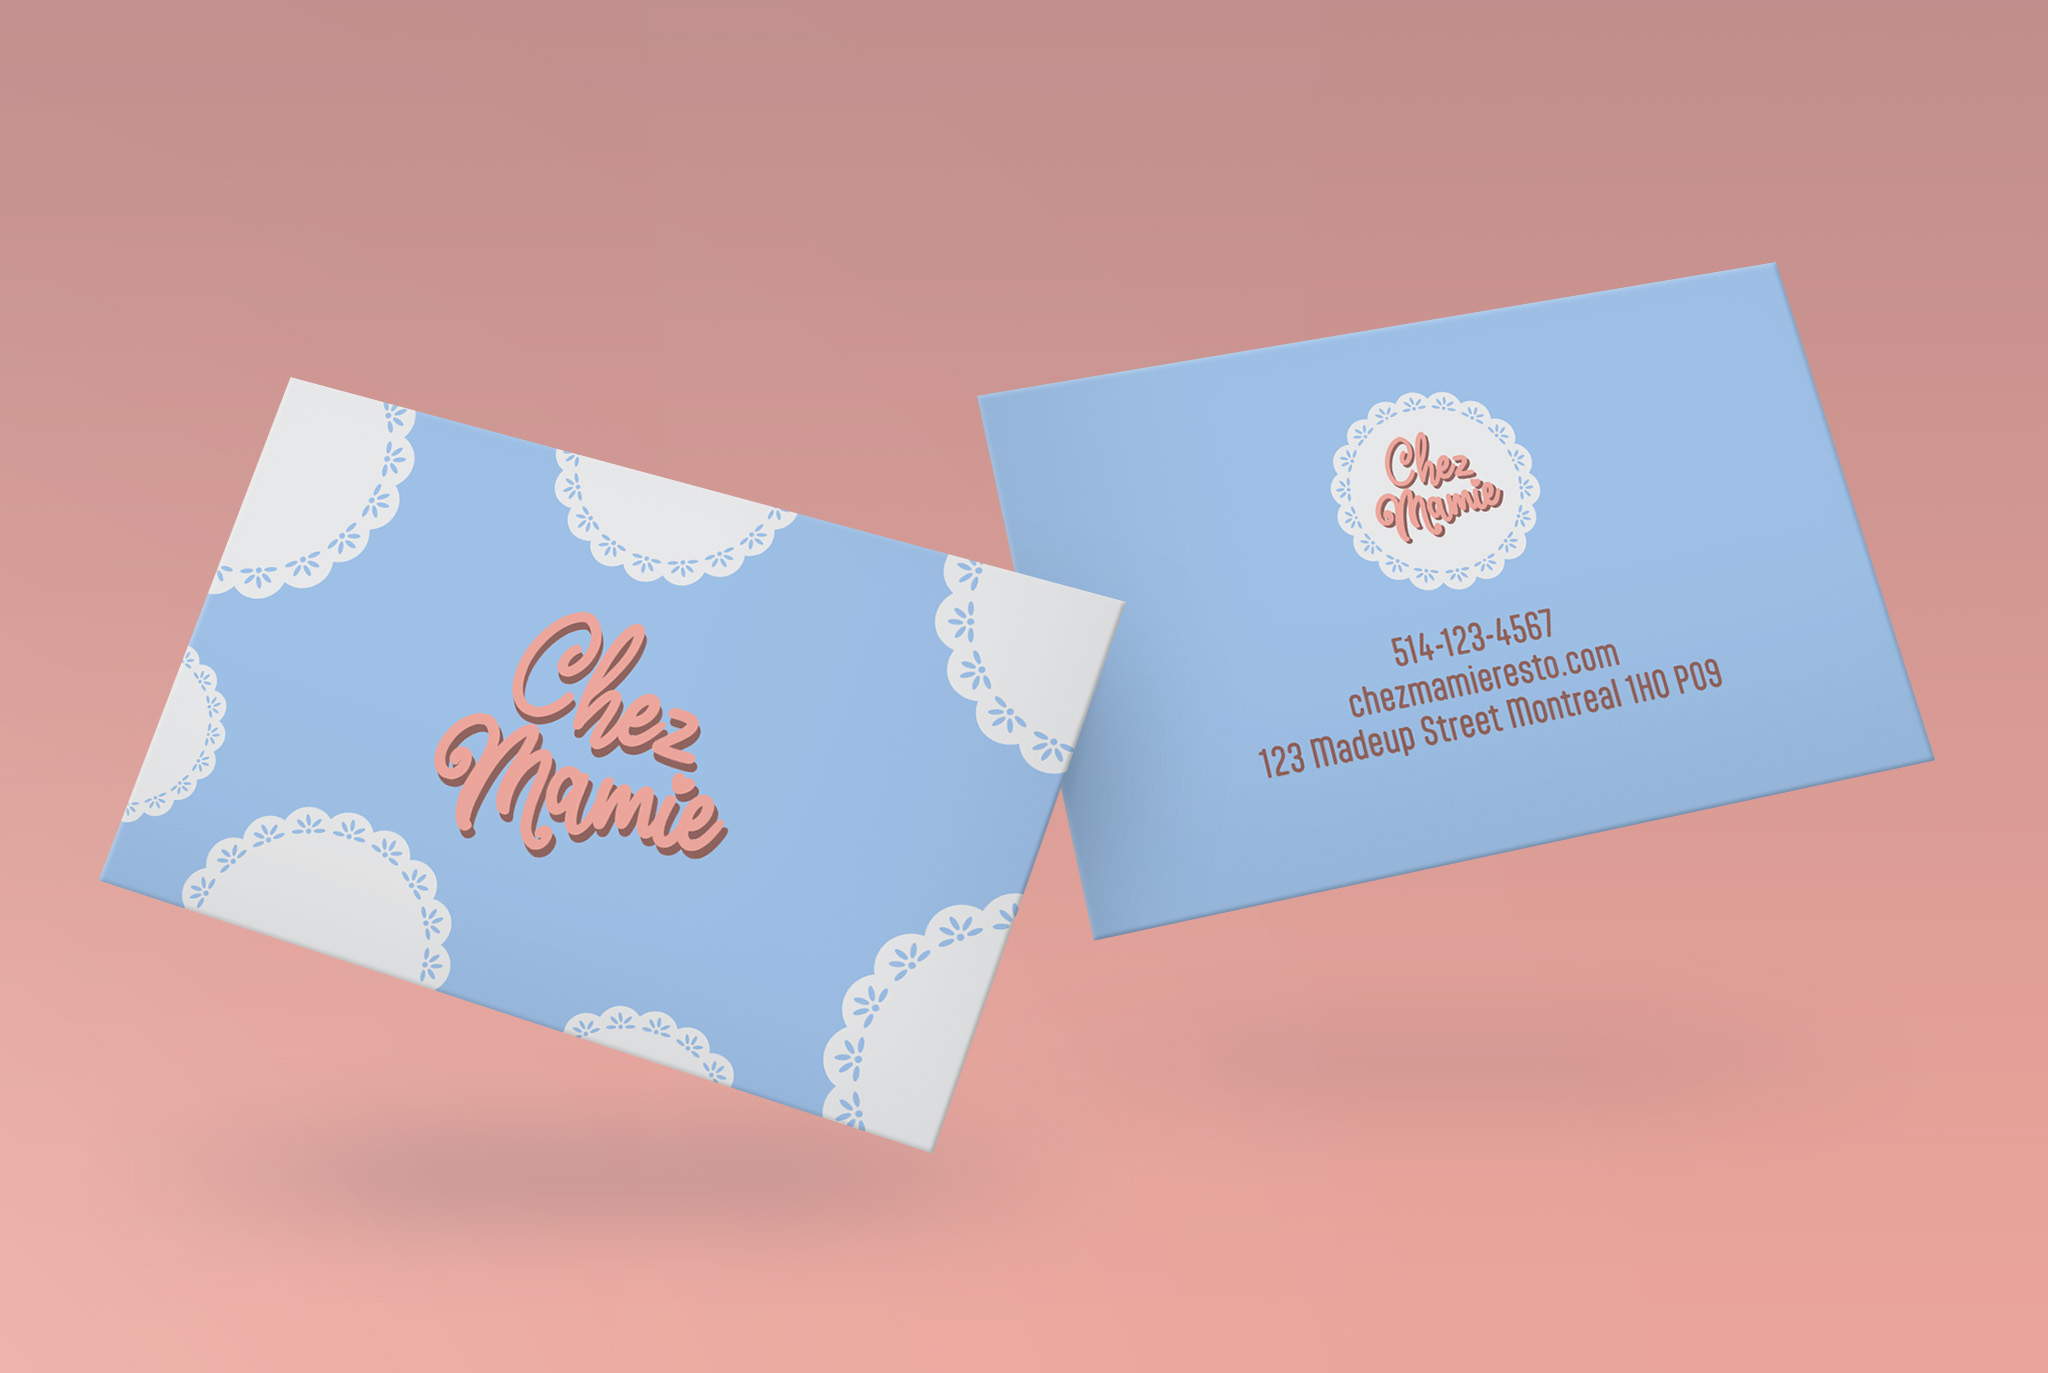 Mockup of blue buisness cards for fictional cafe Chez Mamie on pink background. The front of the card features the logo as well as a doily pattern on the edges. The back of the card features the logo and contact information.